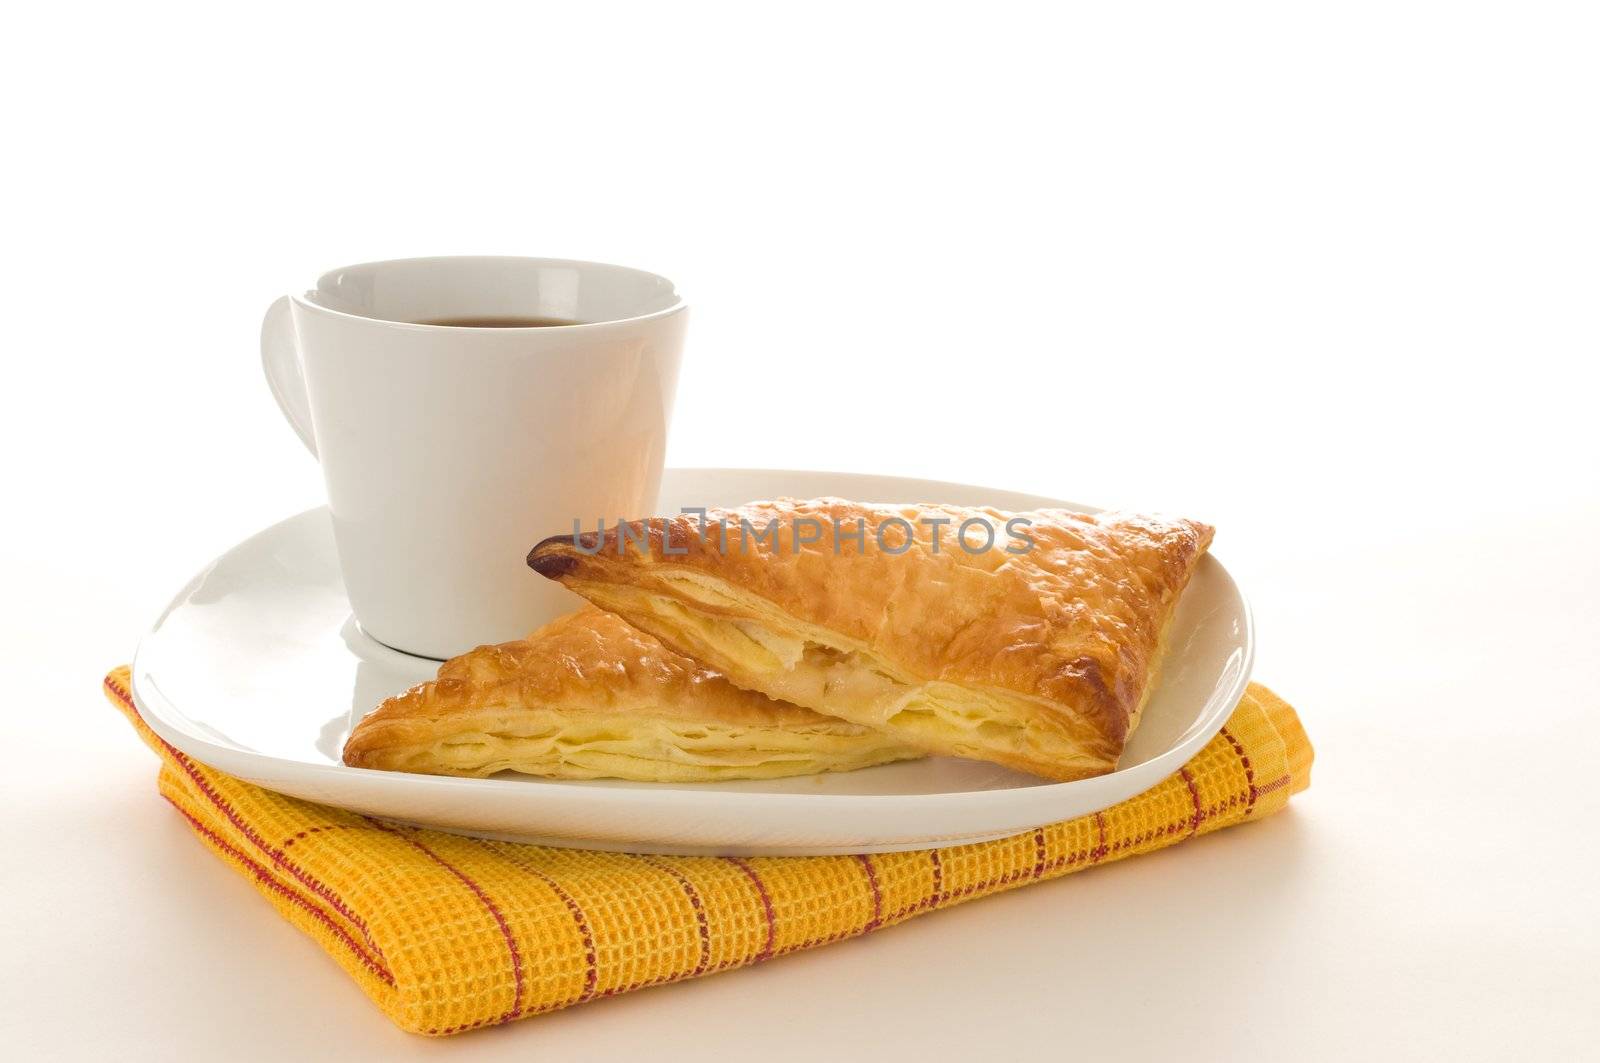 Fresh baked apple turnovers served with coffee.